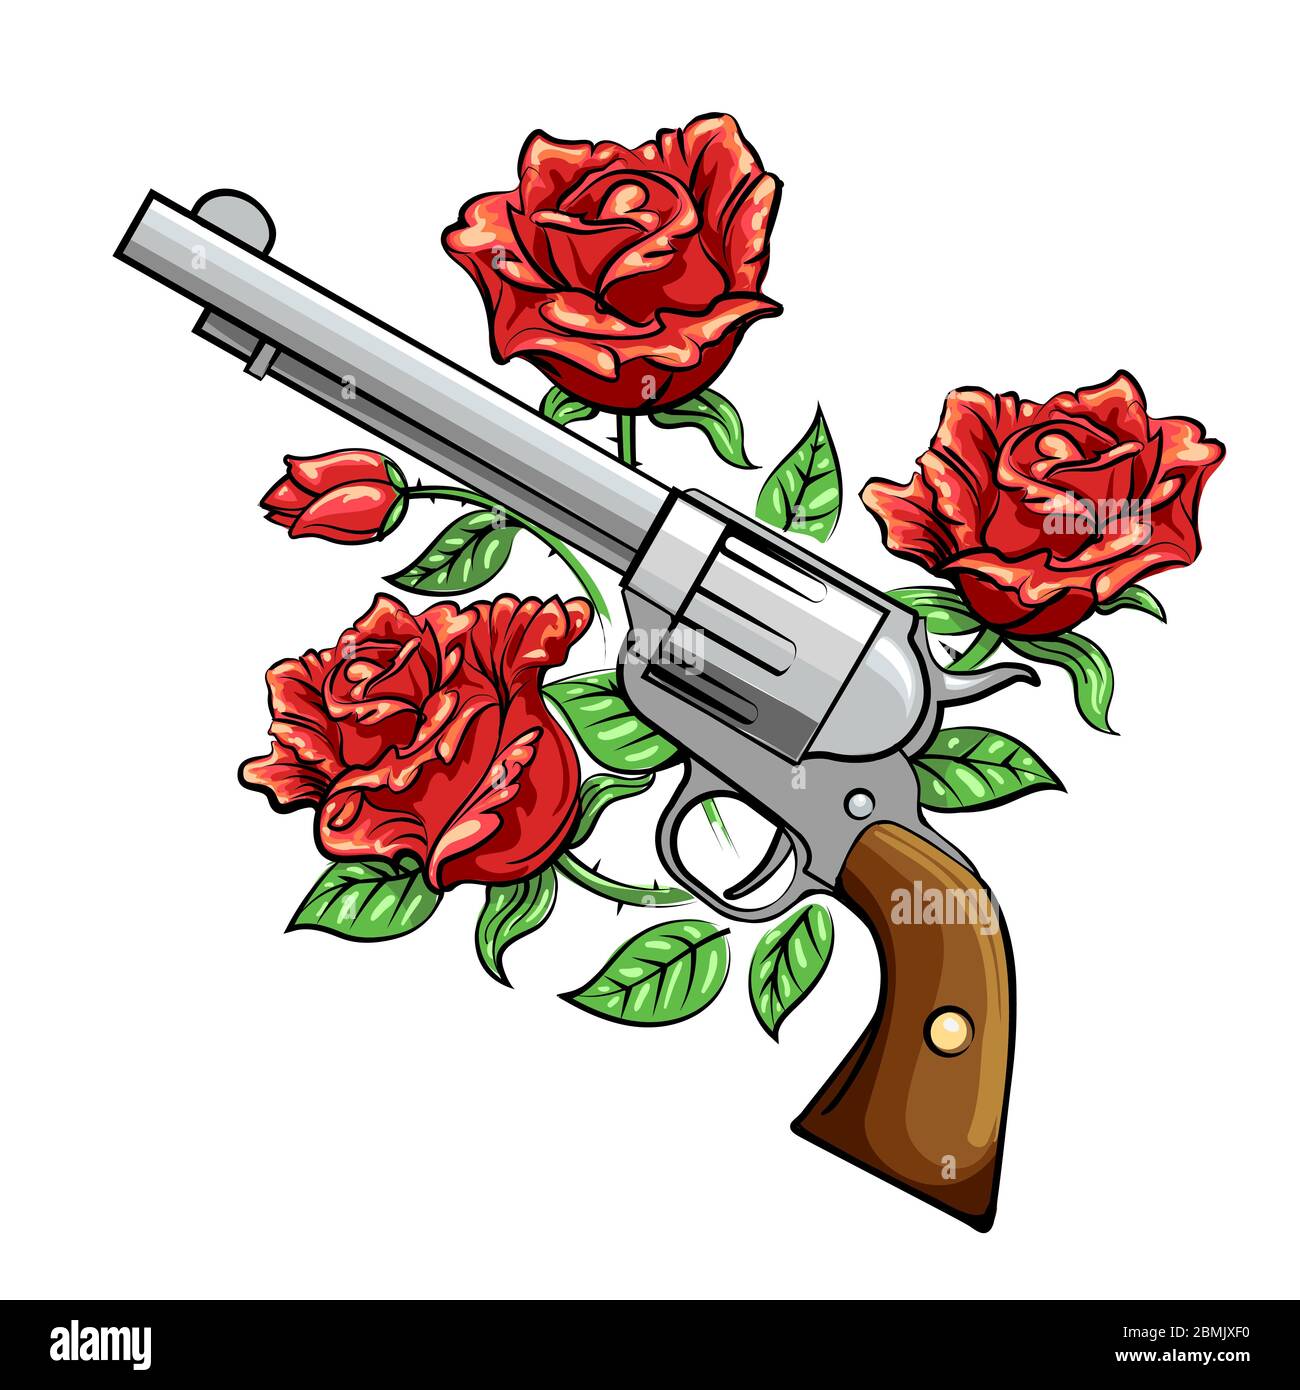 Amazoncom  Gun and Roses Temporary Tattoo Sticker Set of 2  OhMyTat   Beauty  Personal Care